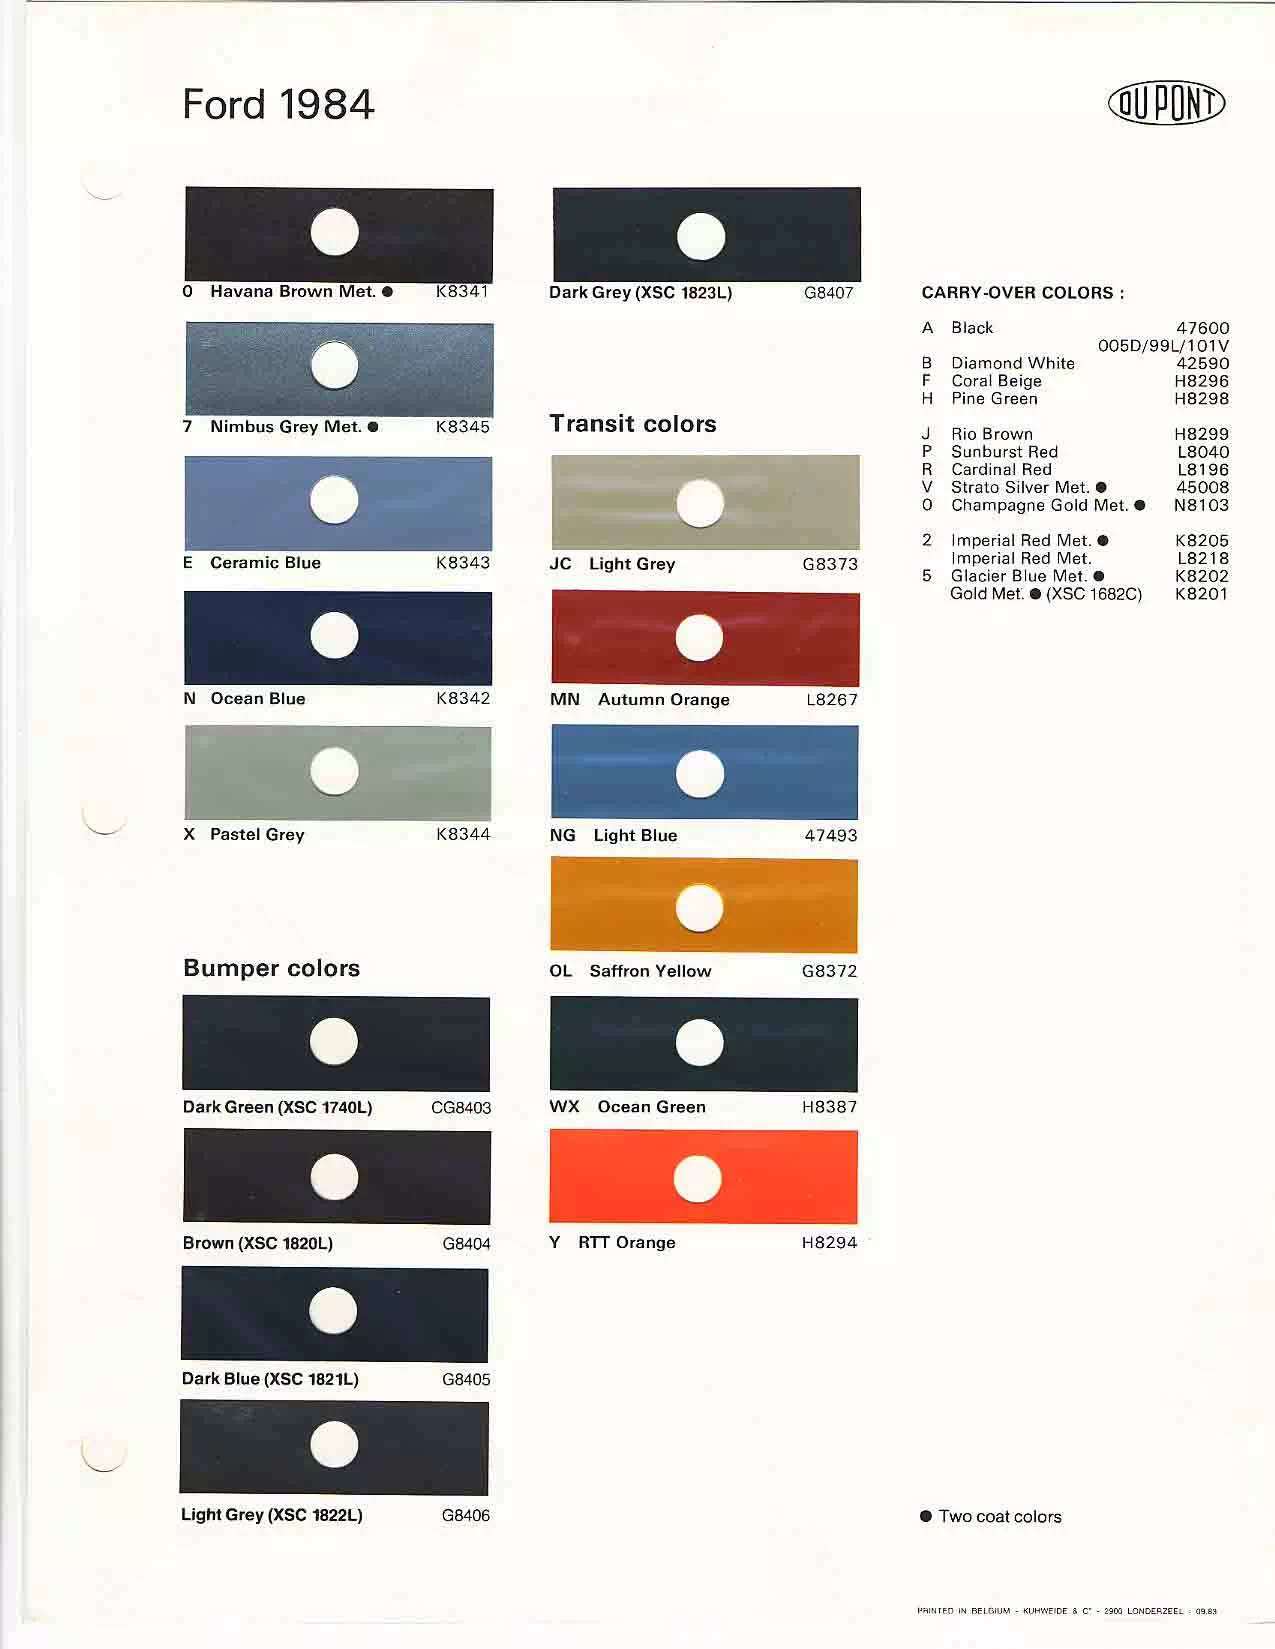 Colors and Codes used on Ford European Vehicles in 1984